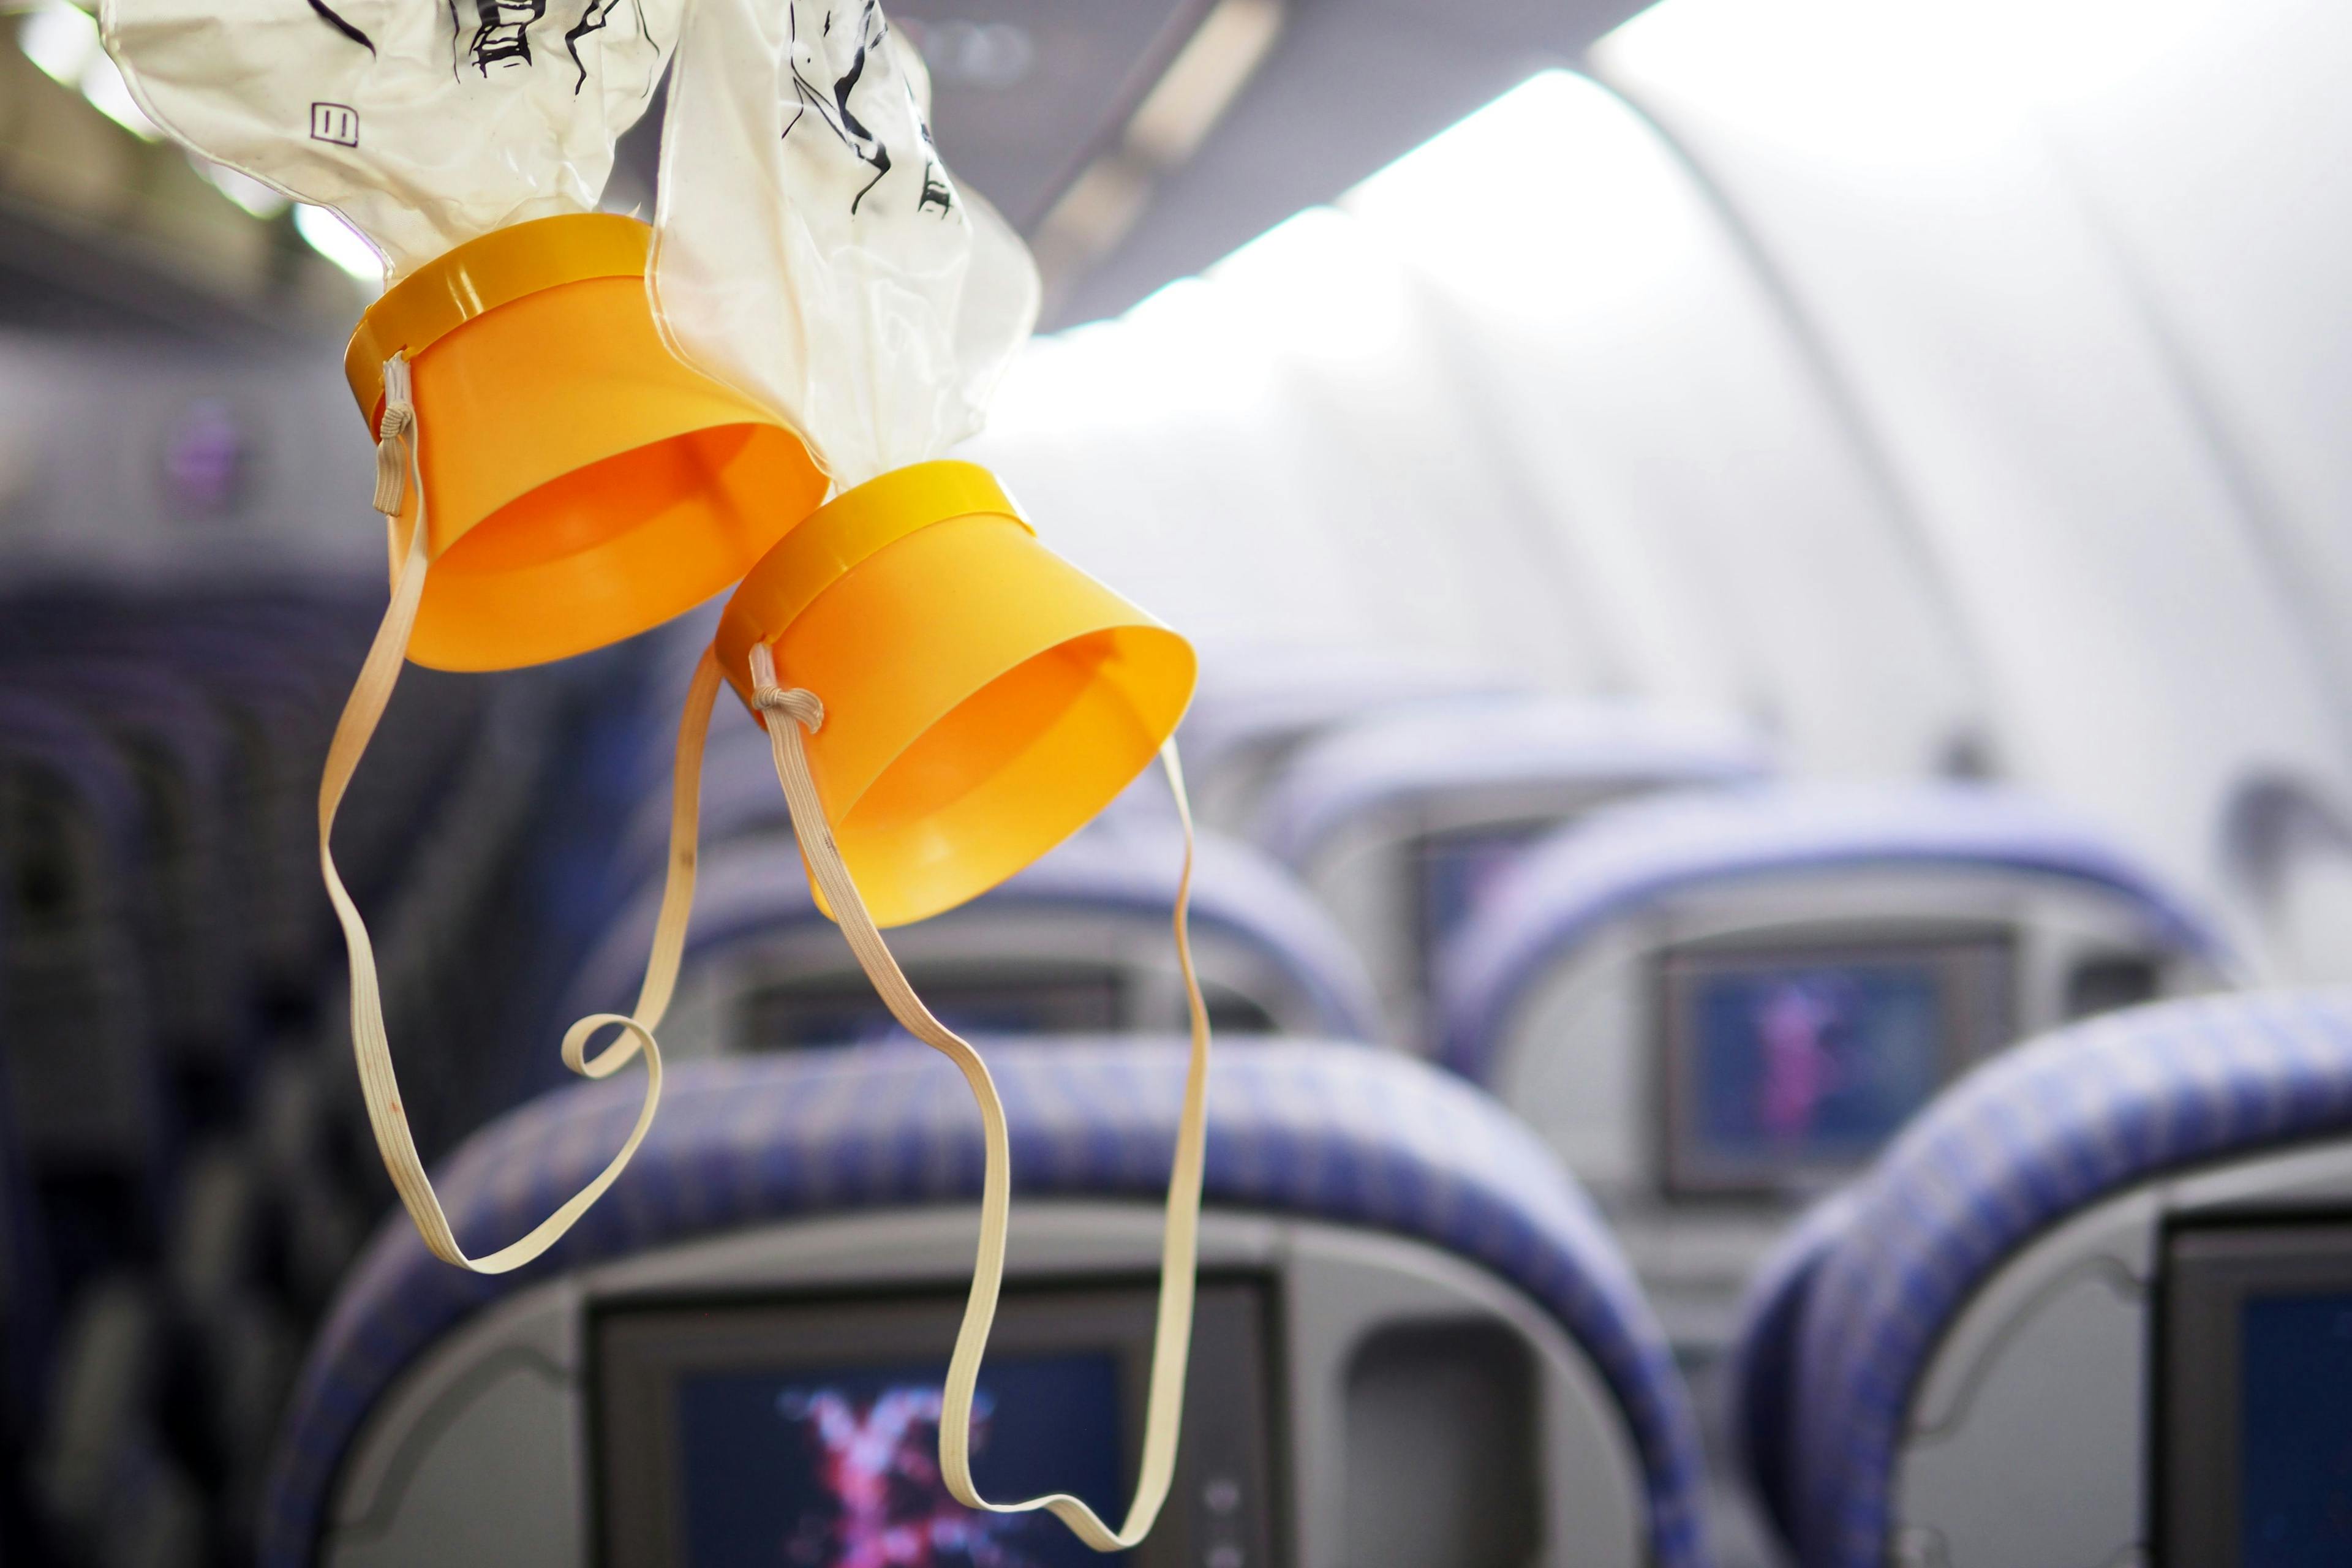 How the 'oxygen mask rule' can help combat stress